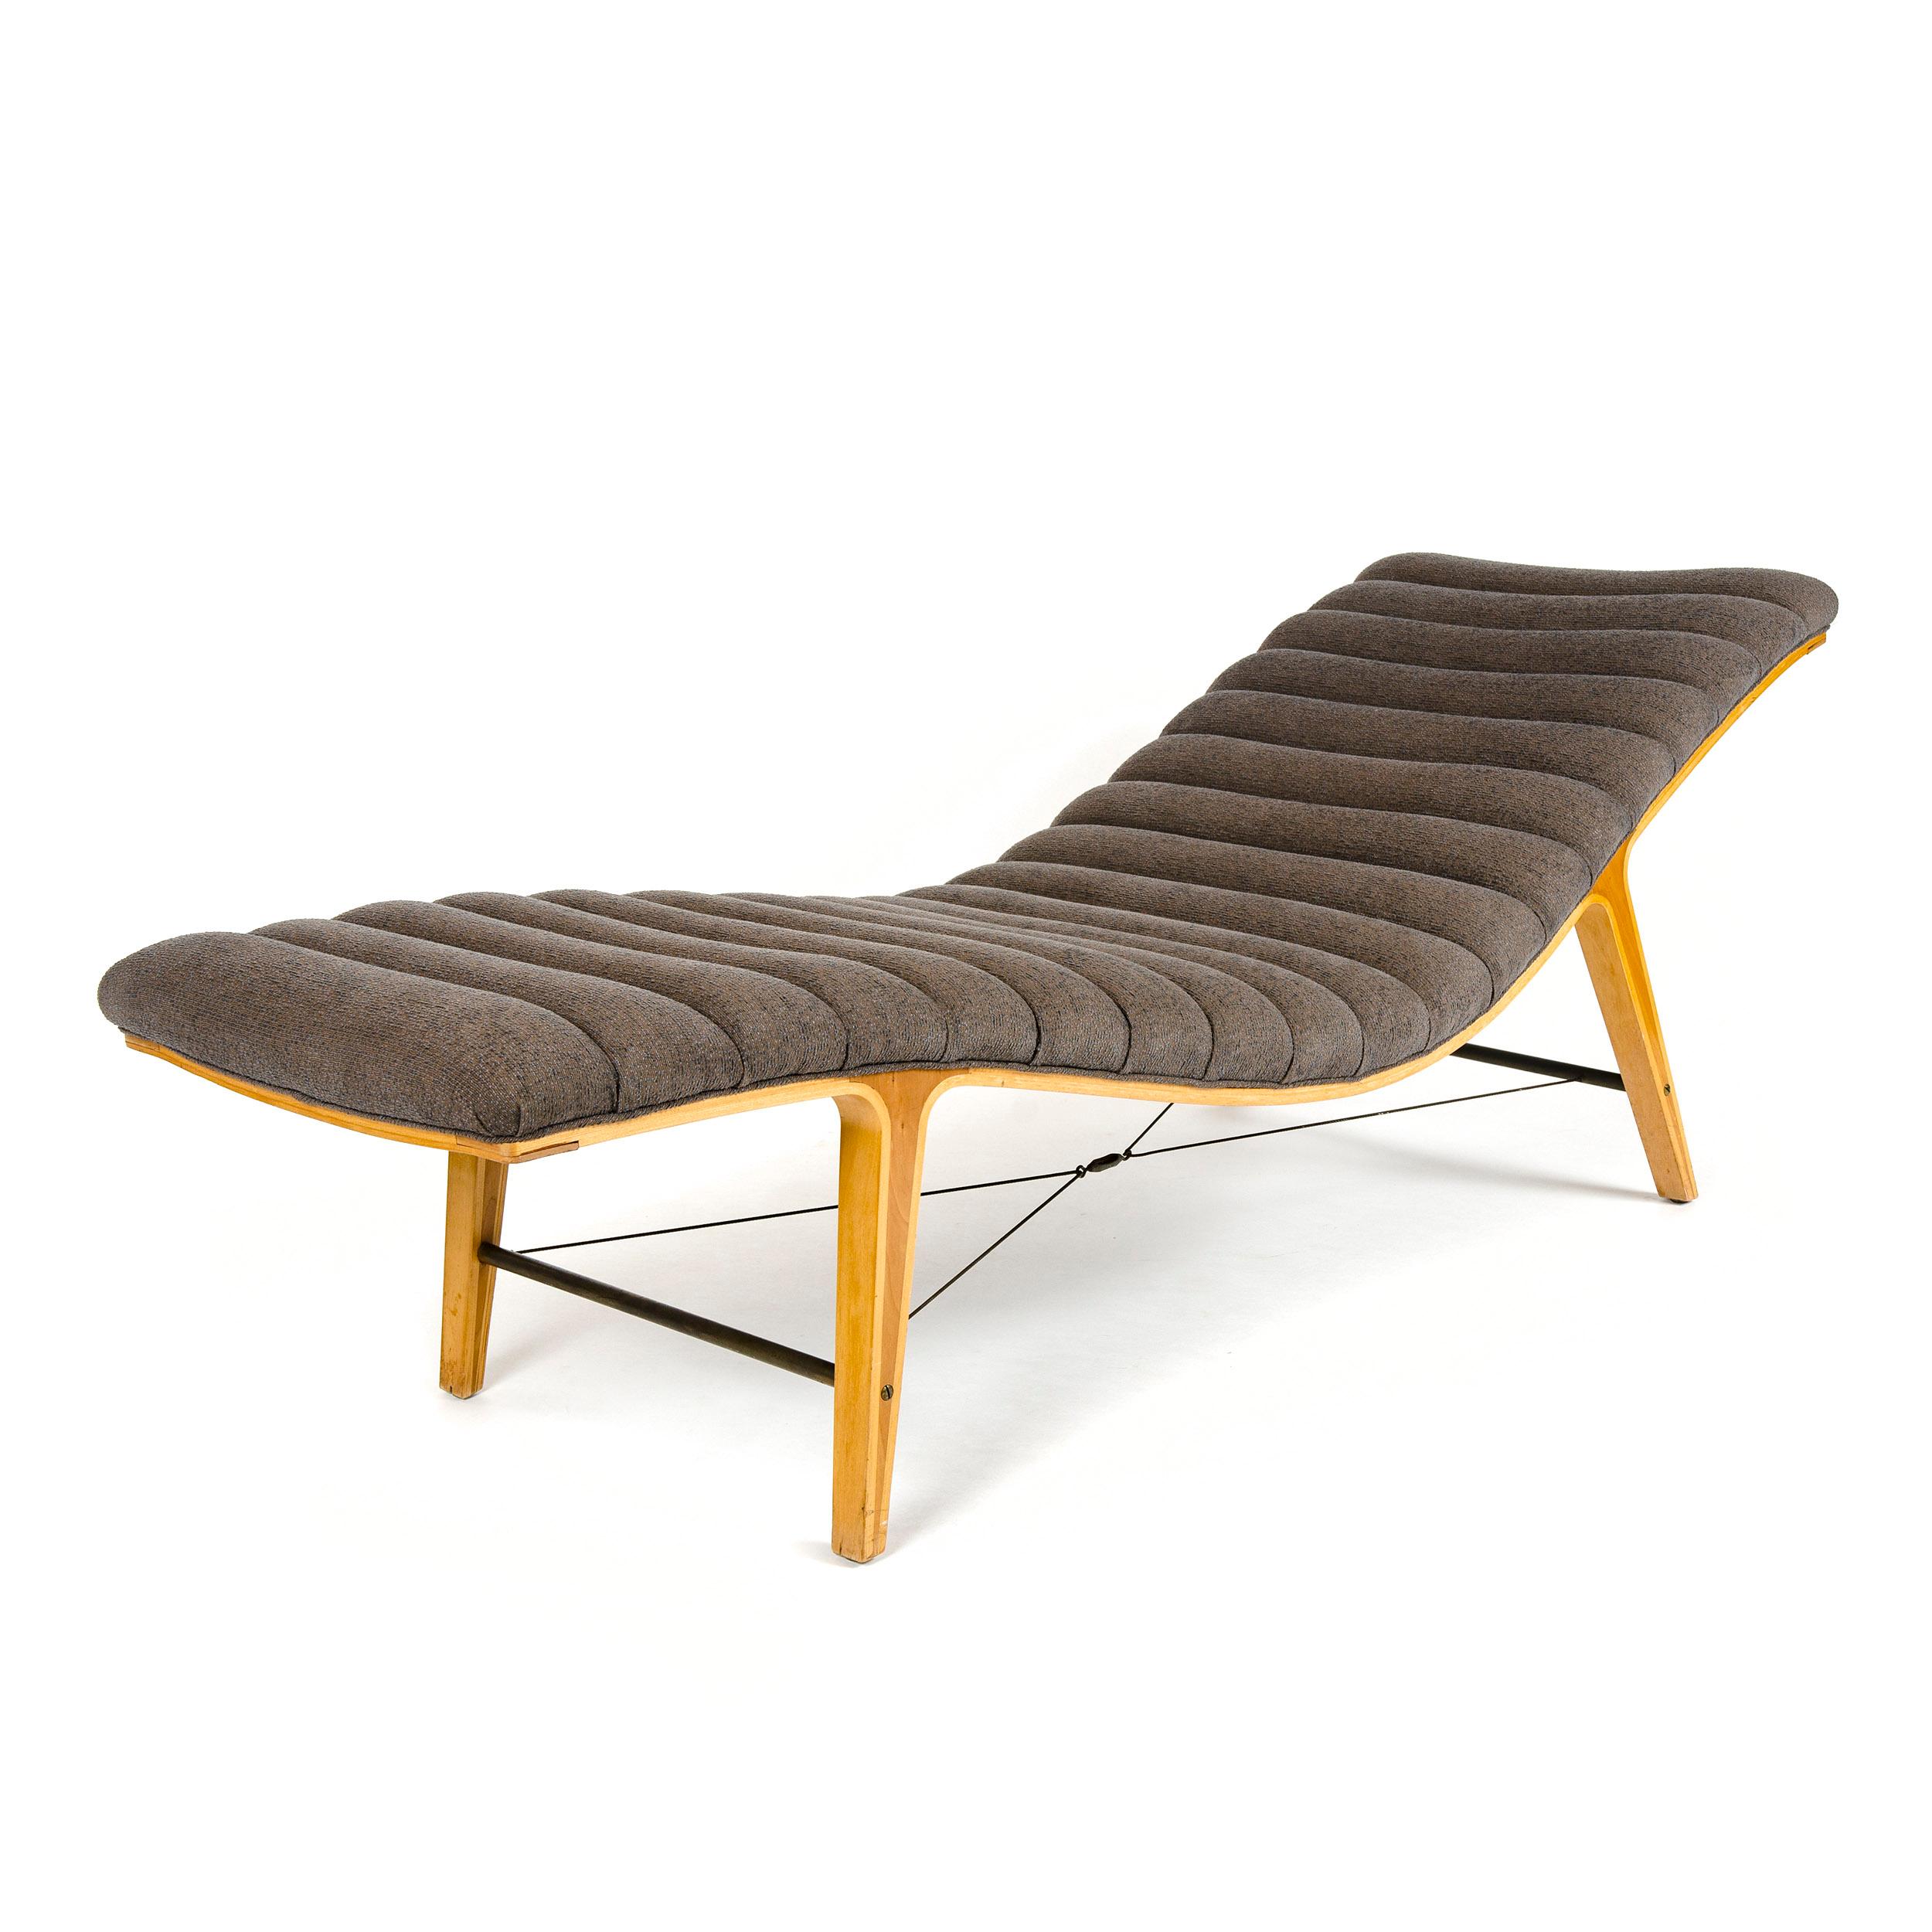 1950s chaise lounge